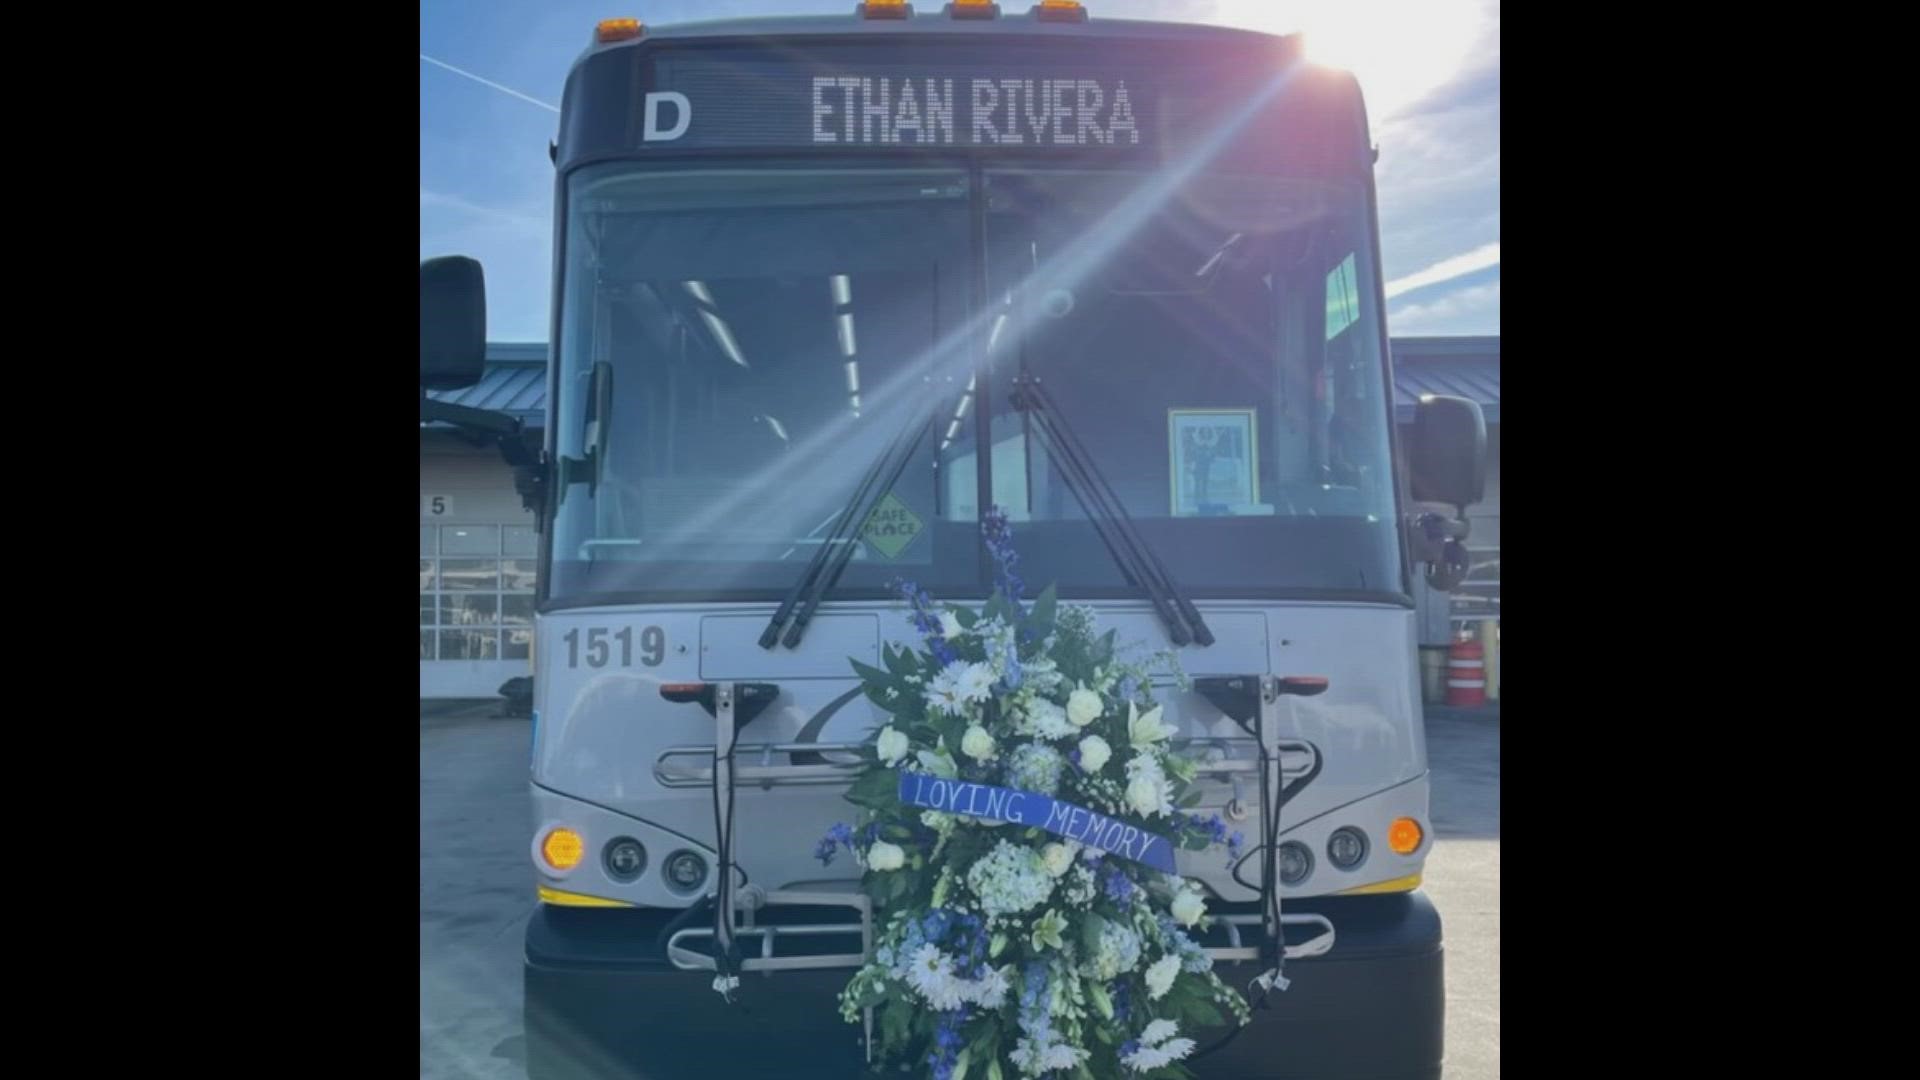 Ethan Rivera was shot in Uptown while working his bus route Friday night. It happened after a verbal exchange with another driver.